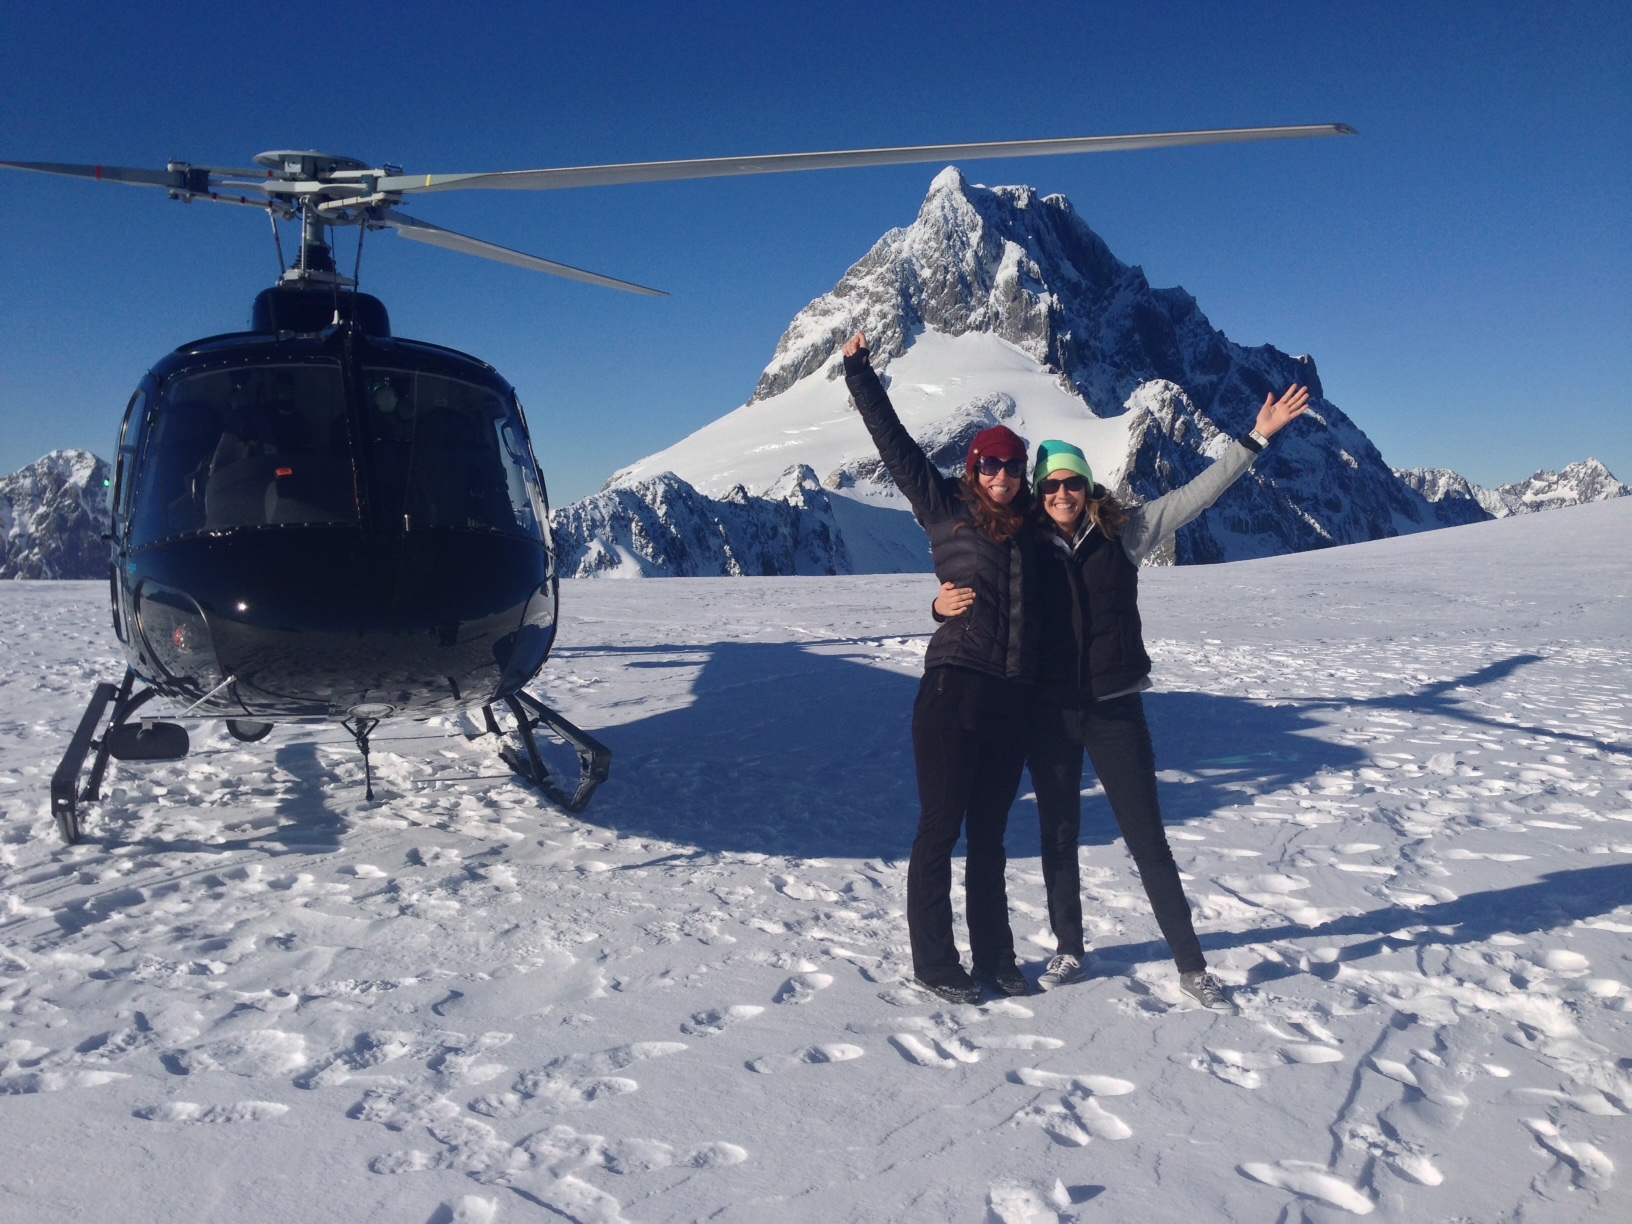 My sister, Cassidy, high on life after a helicopter flight to a glacier on New Zealand's South Island.